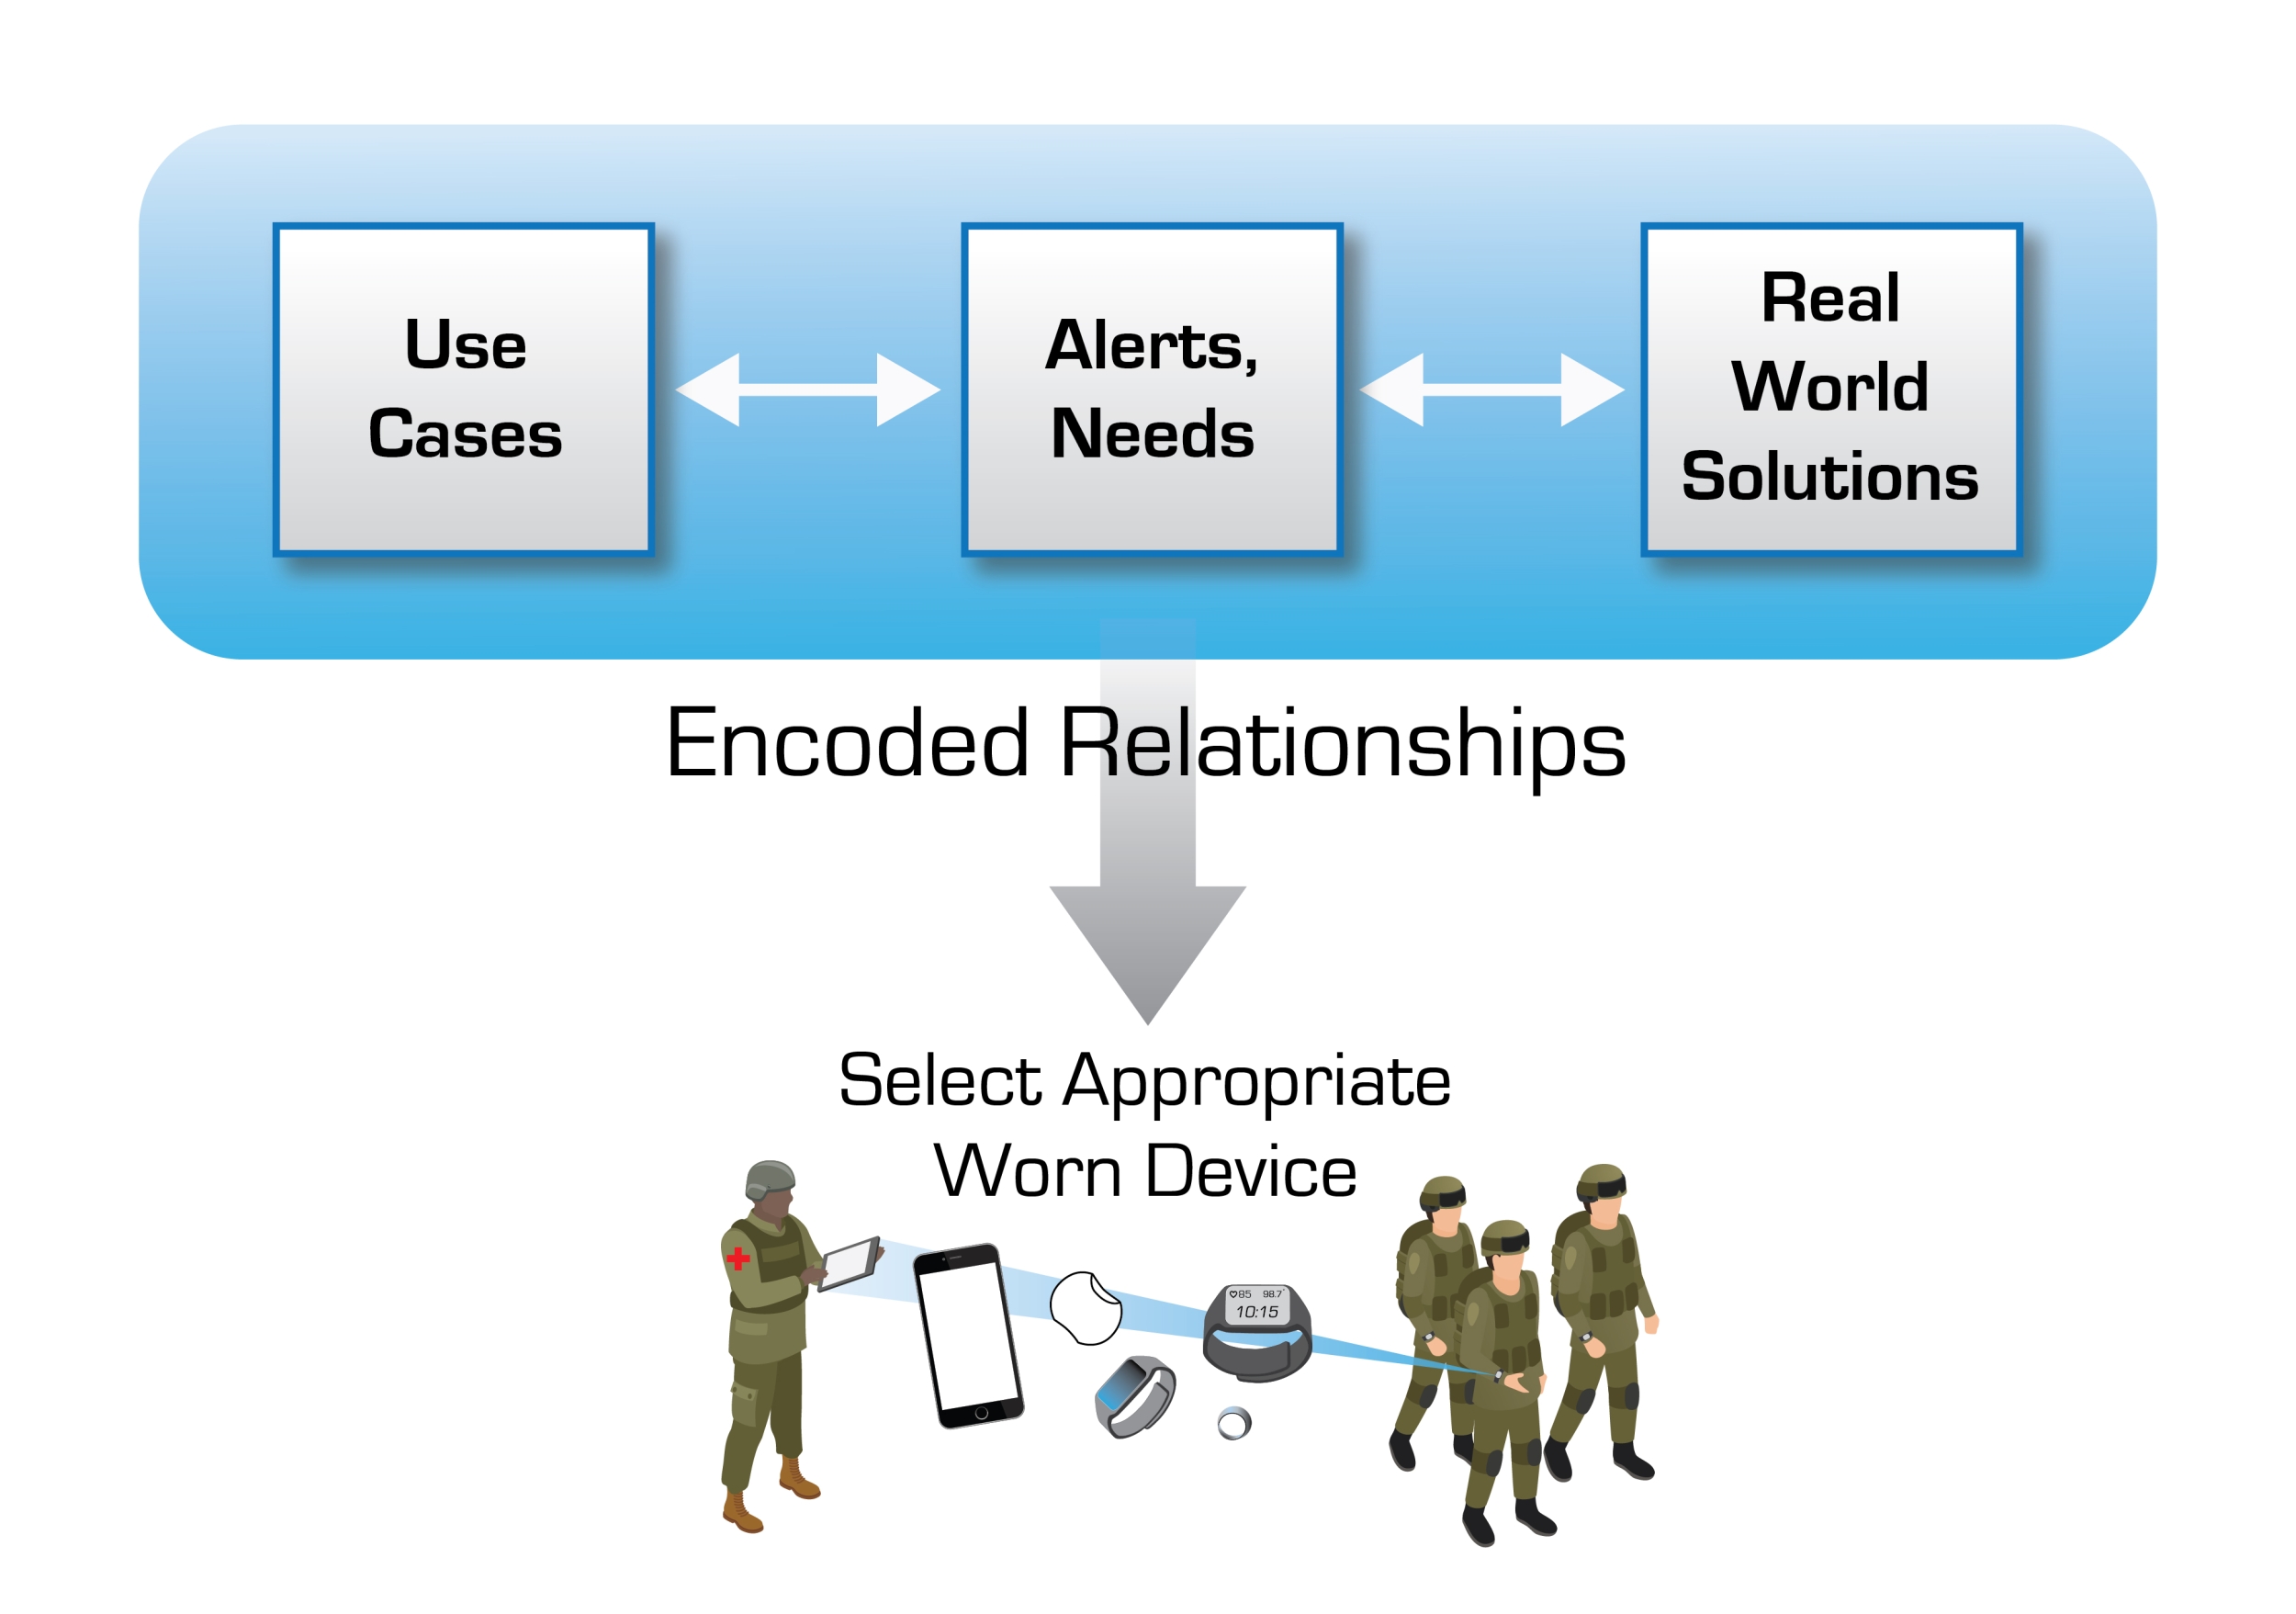 We are building a model-based systems architecture that captures the traceability from military use cases to real-world solutions via common relationships with alerts and user needs